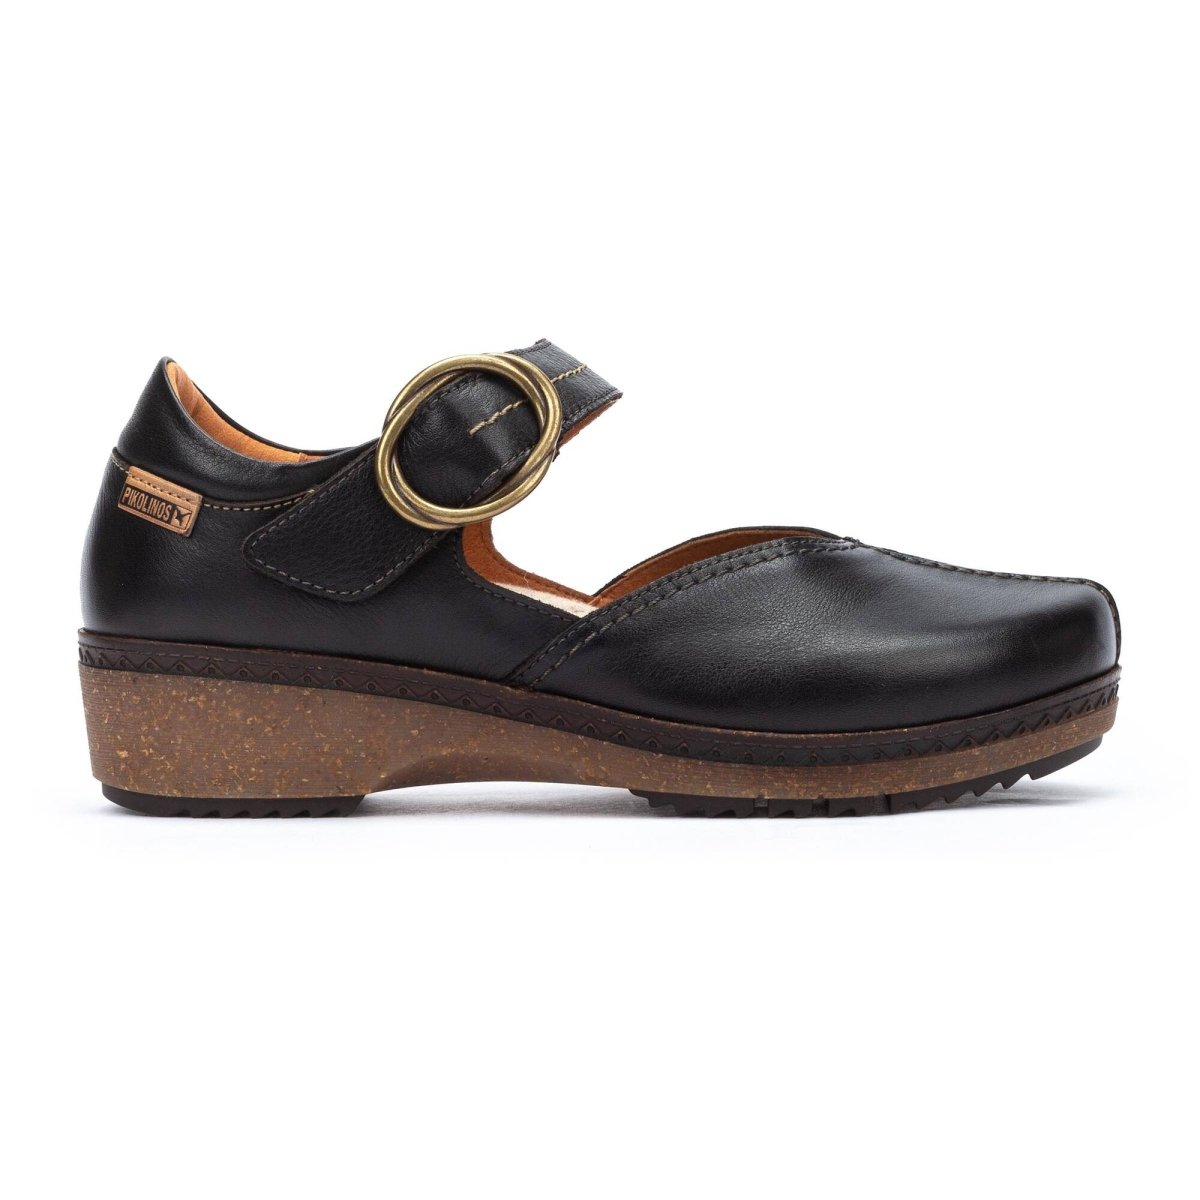 PIKOLINOS GRANADA W0W-4837 WOMEN'S CLOGS LEATHER SHOES IN BLACK - TLW Shoes